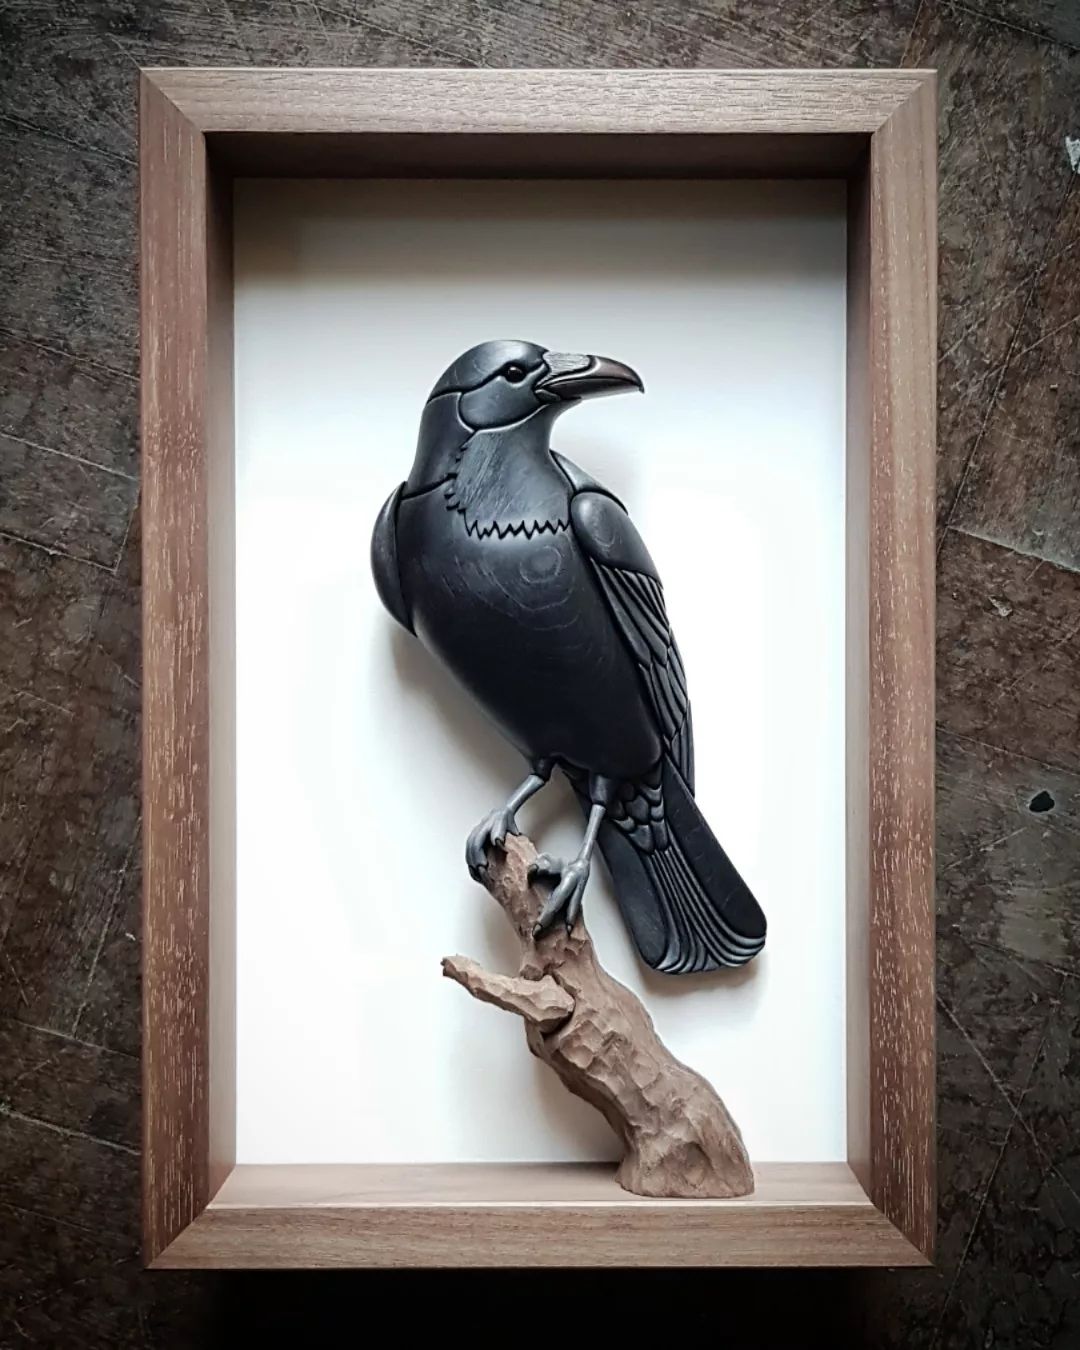 Realistic Wood Sculptures Of Bird Busts And Feathers By T.a.g. Smith (18)